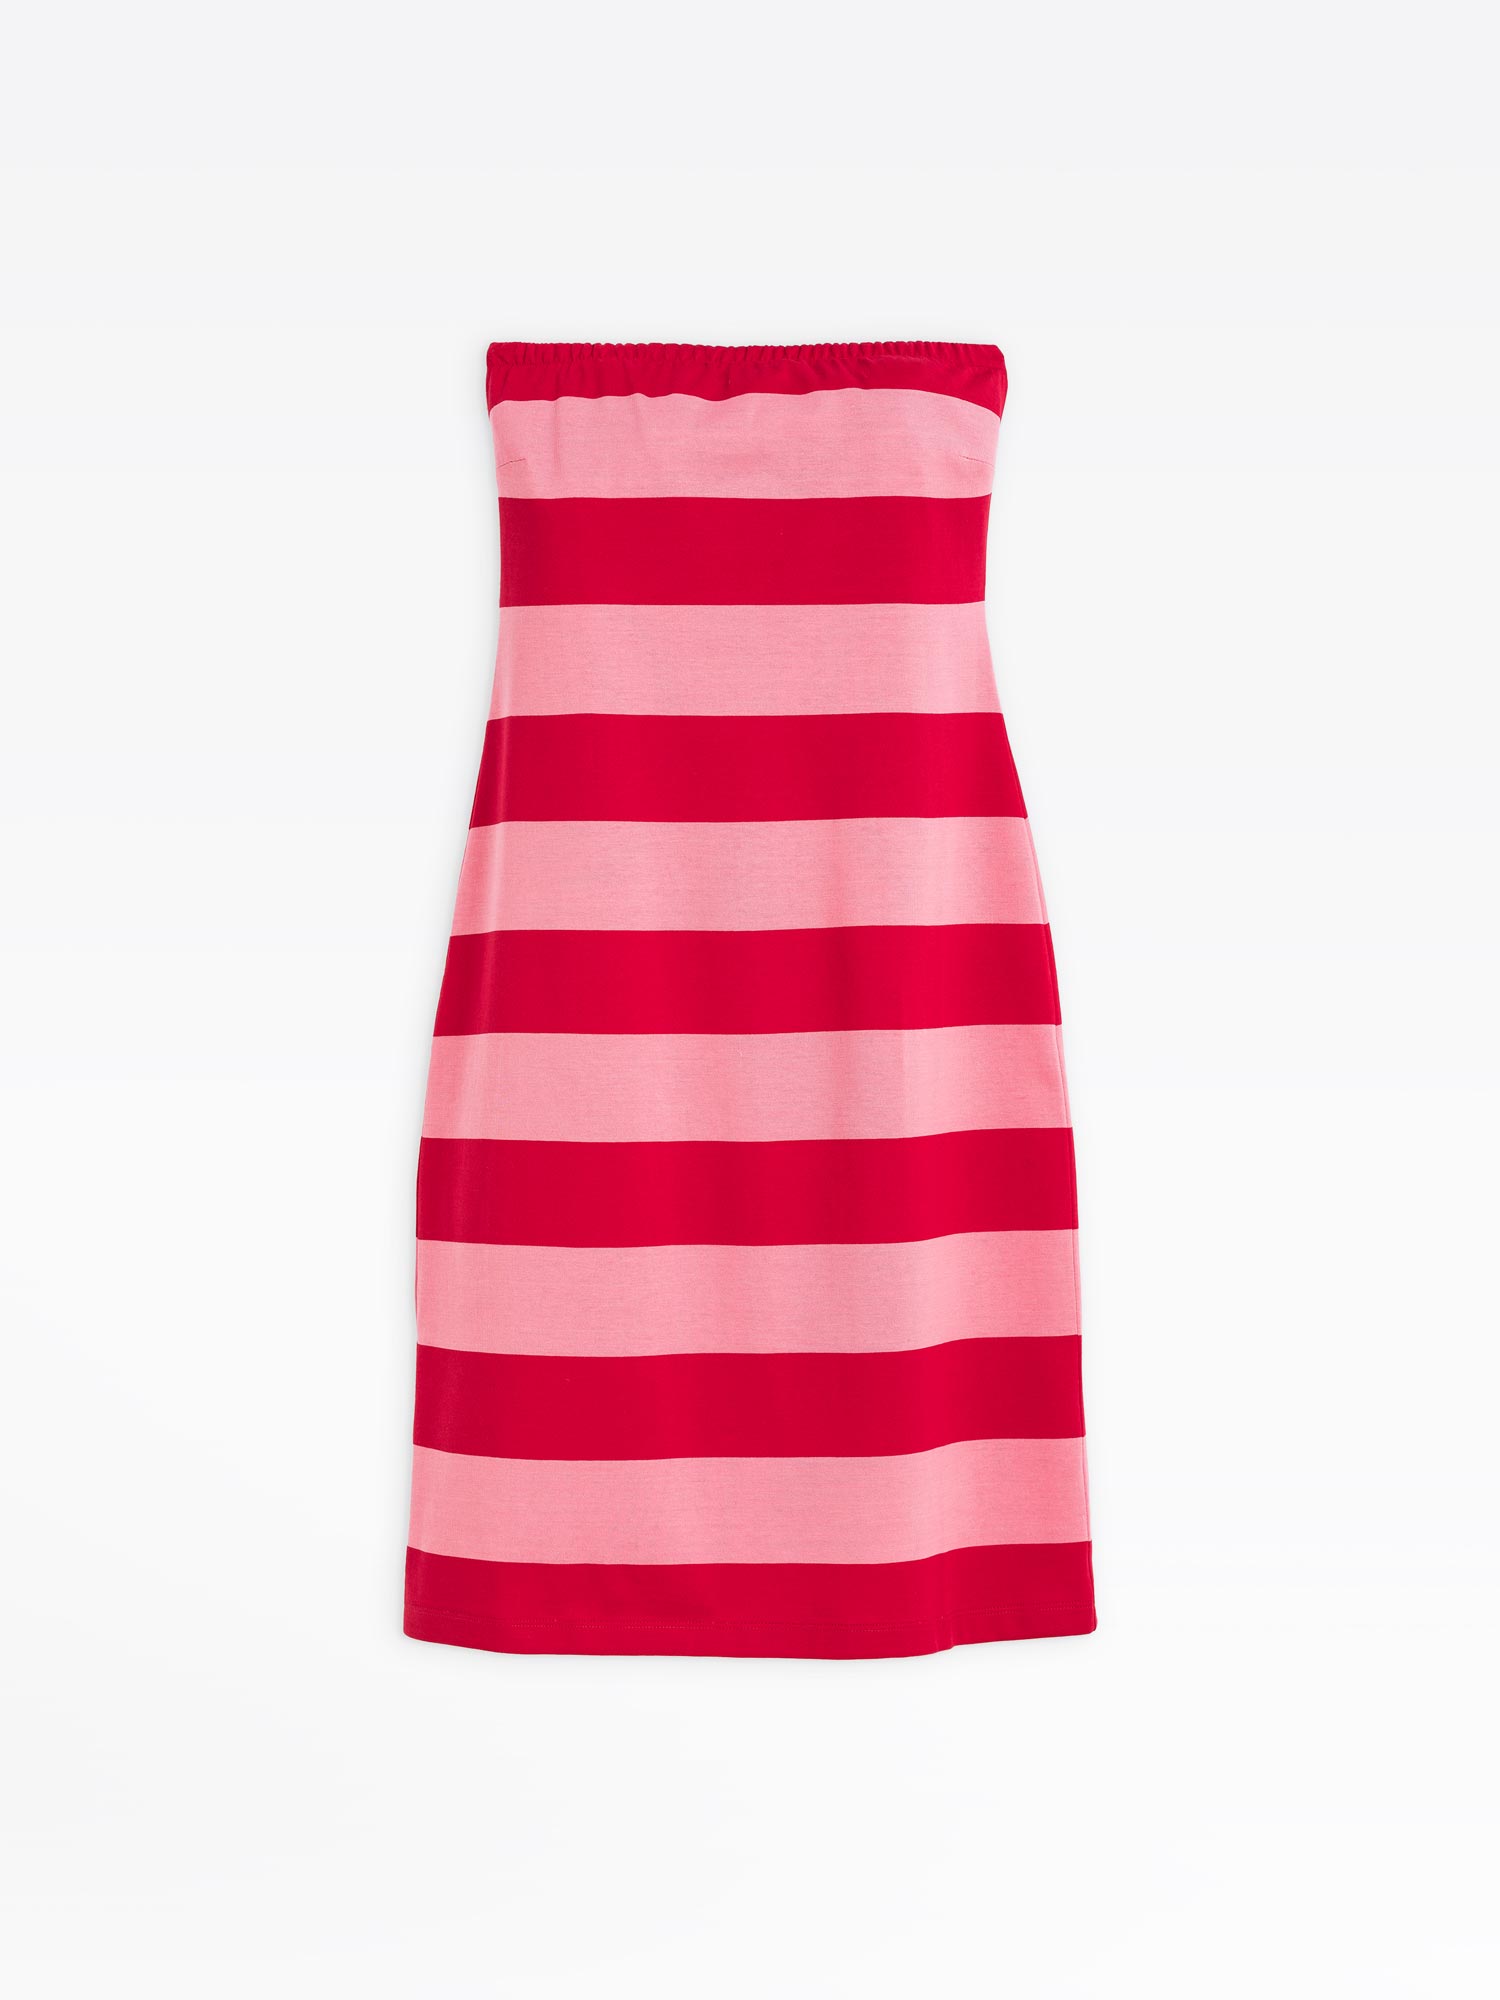 red and pink striped dress